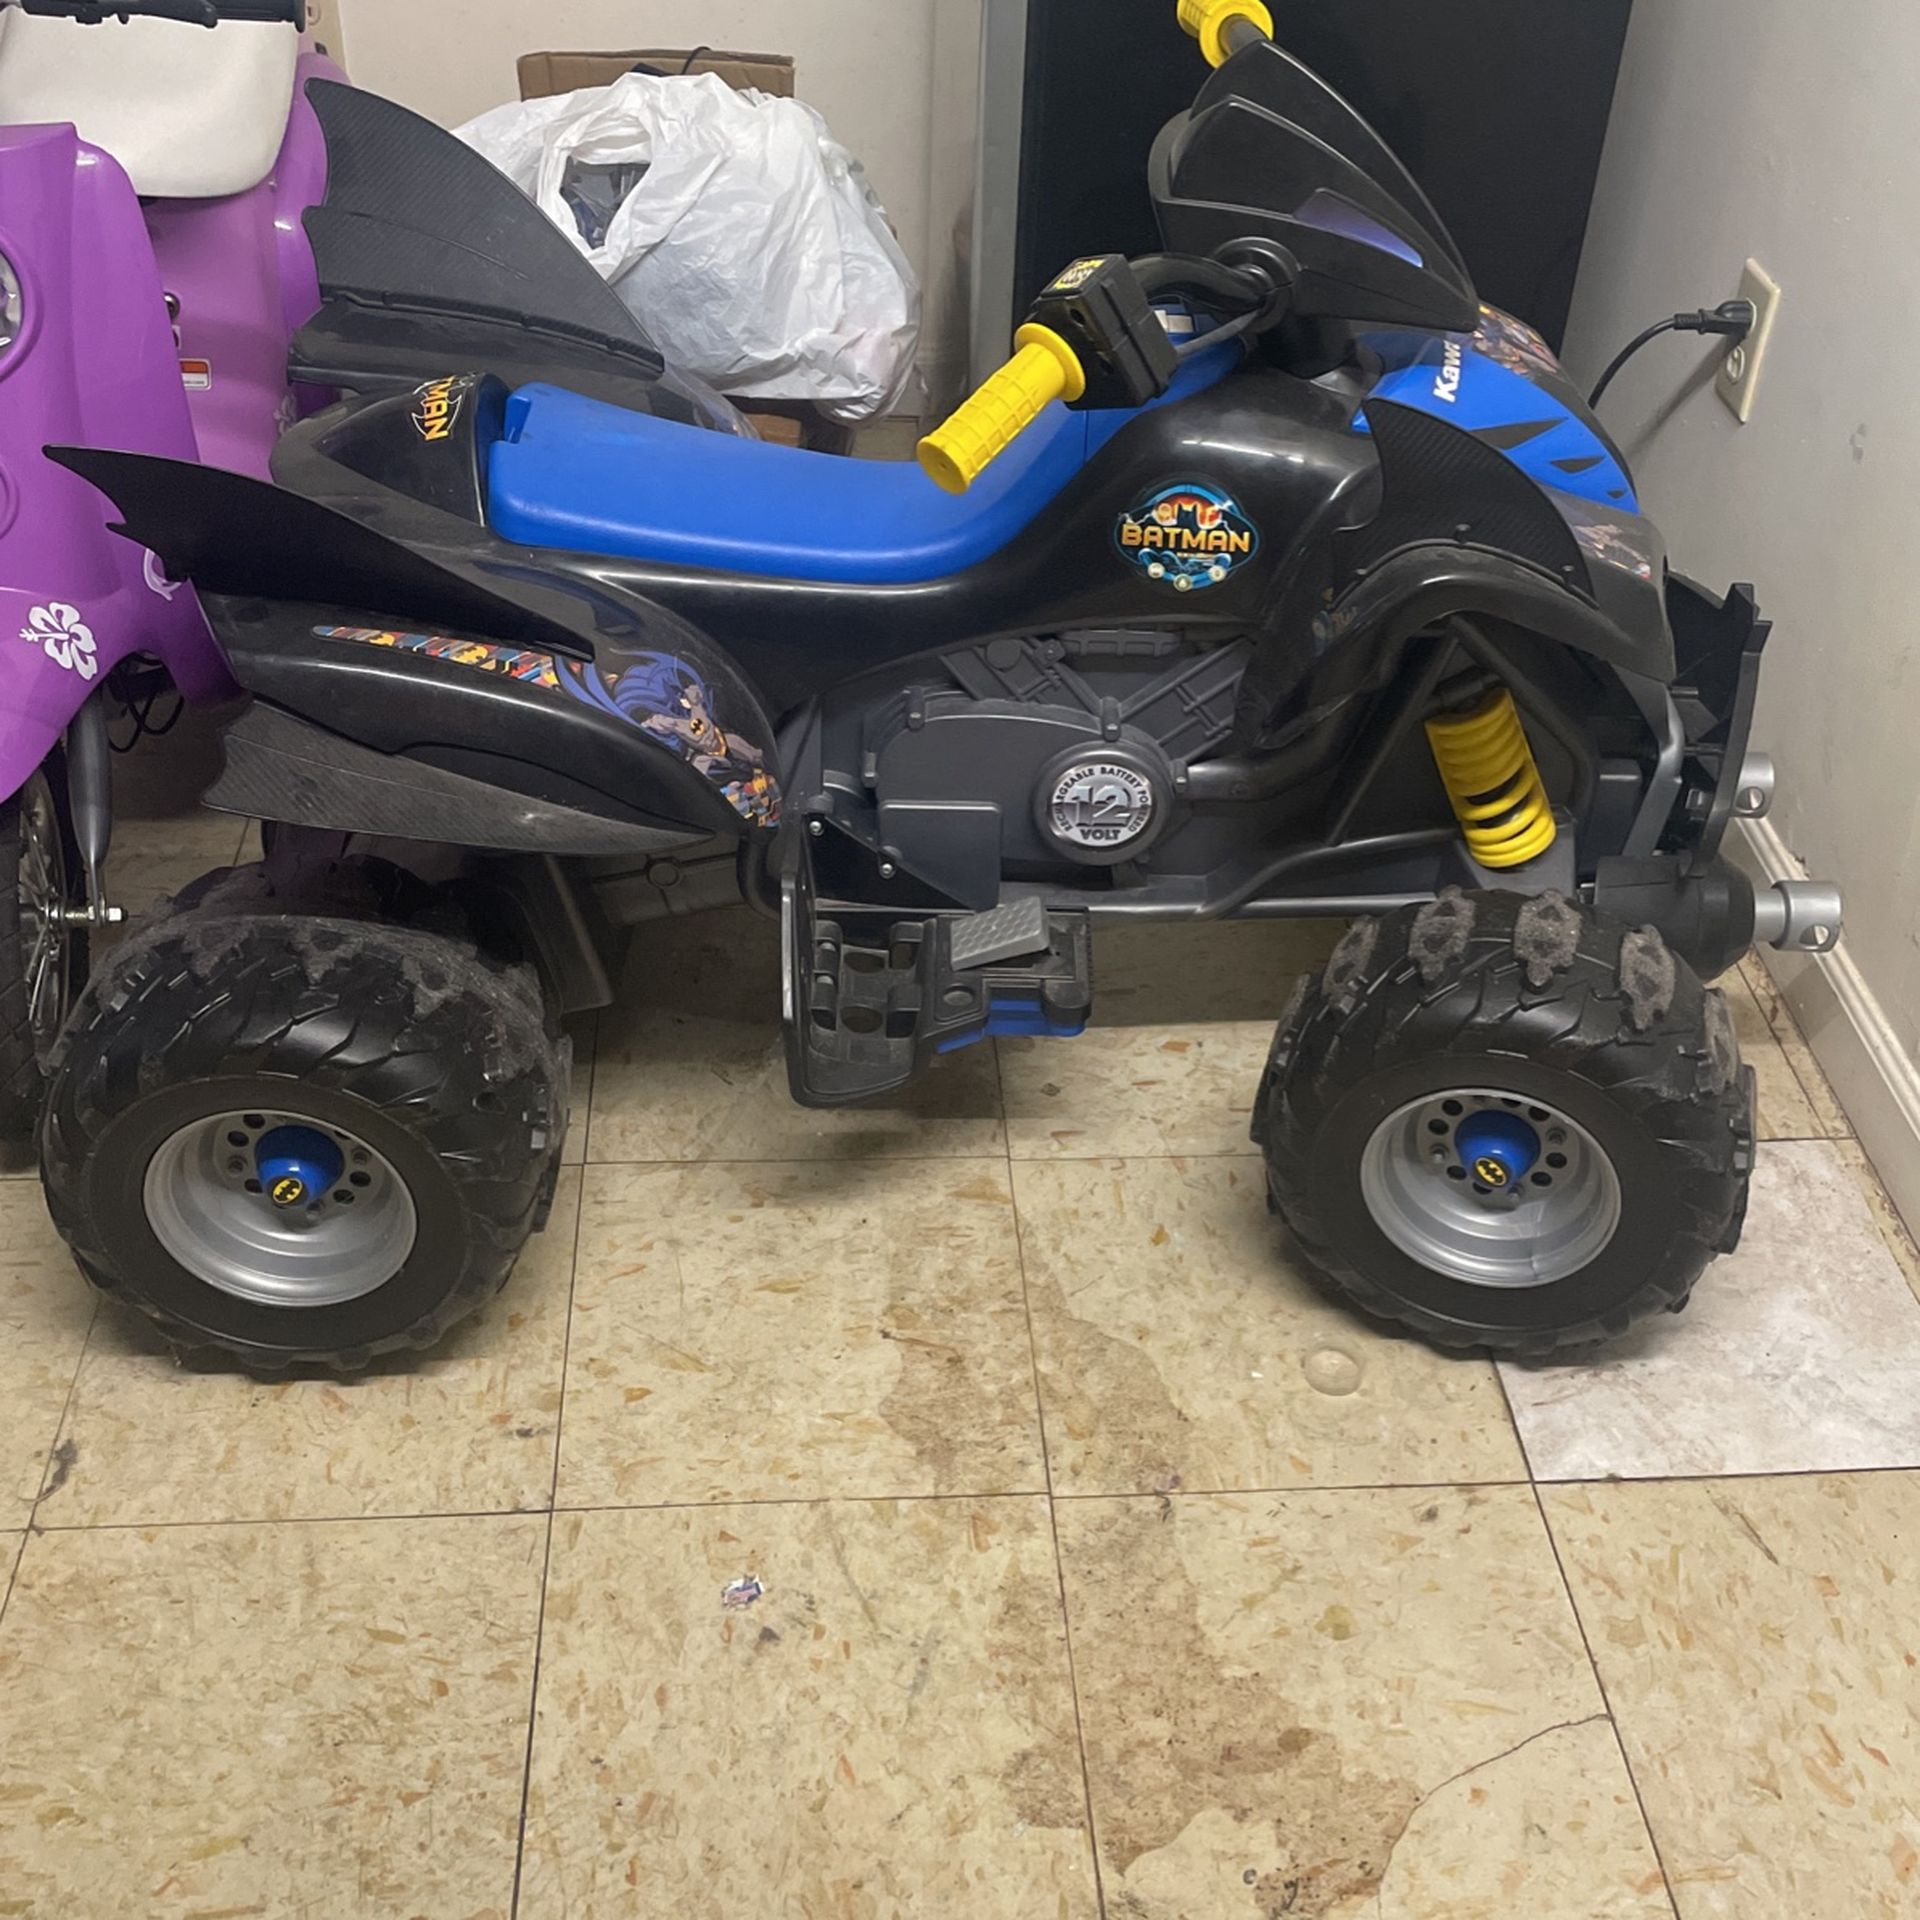 Batman four wheeler power wheel great shape runs well two different speeds front and back button with charger only road a few times